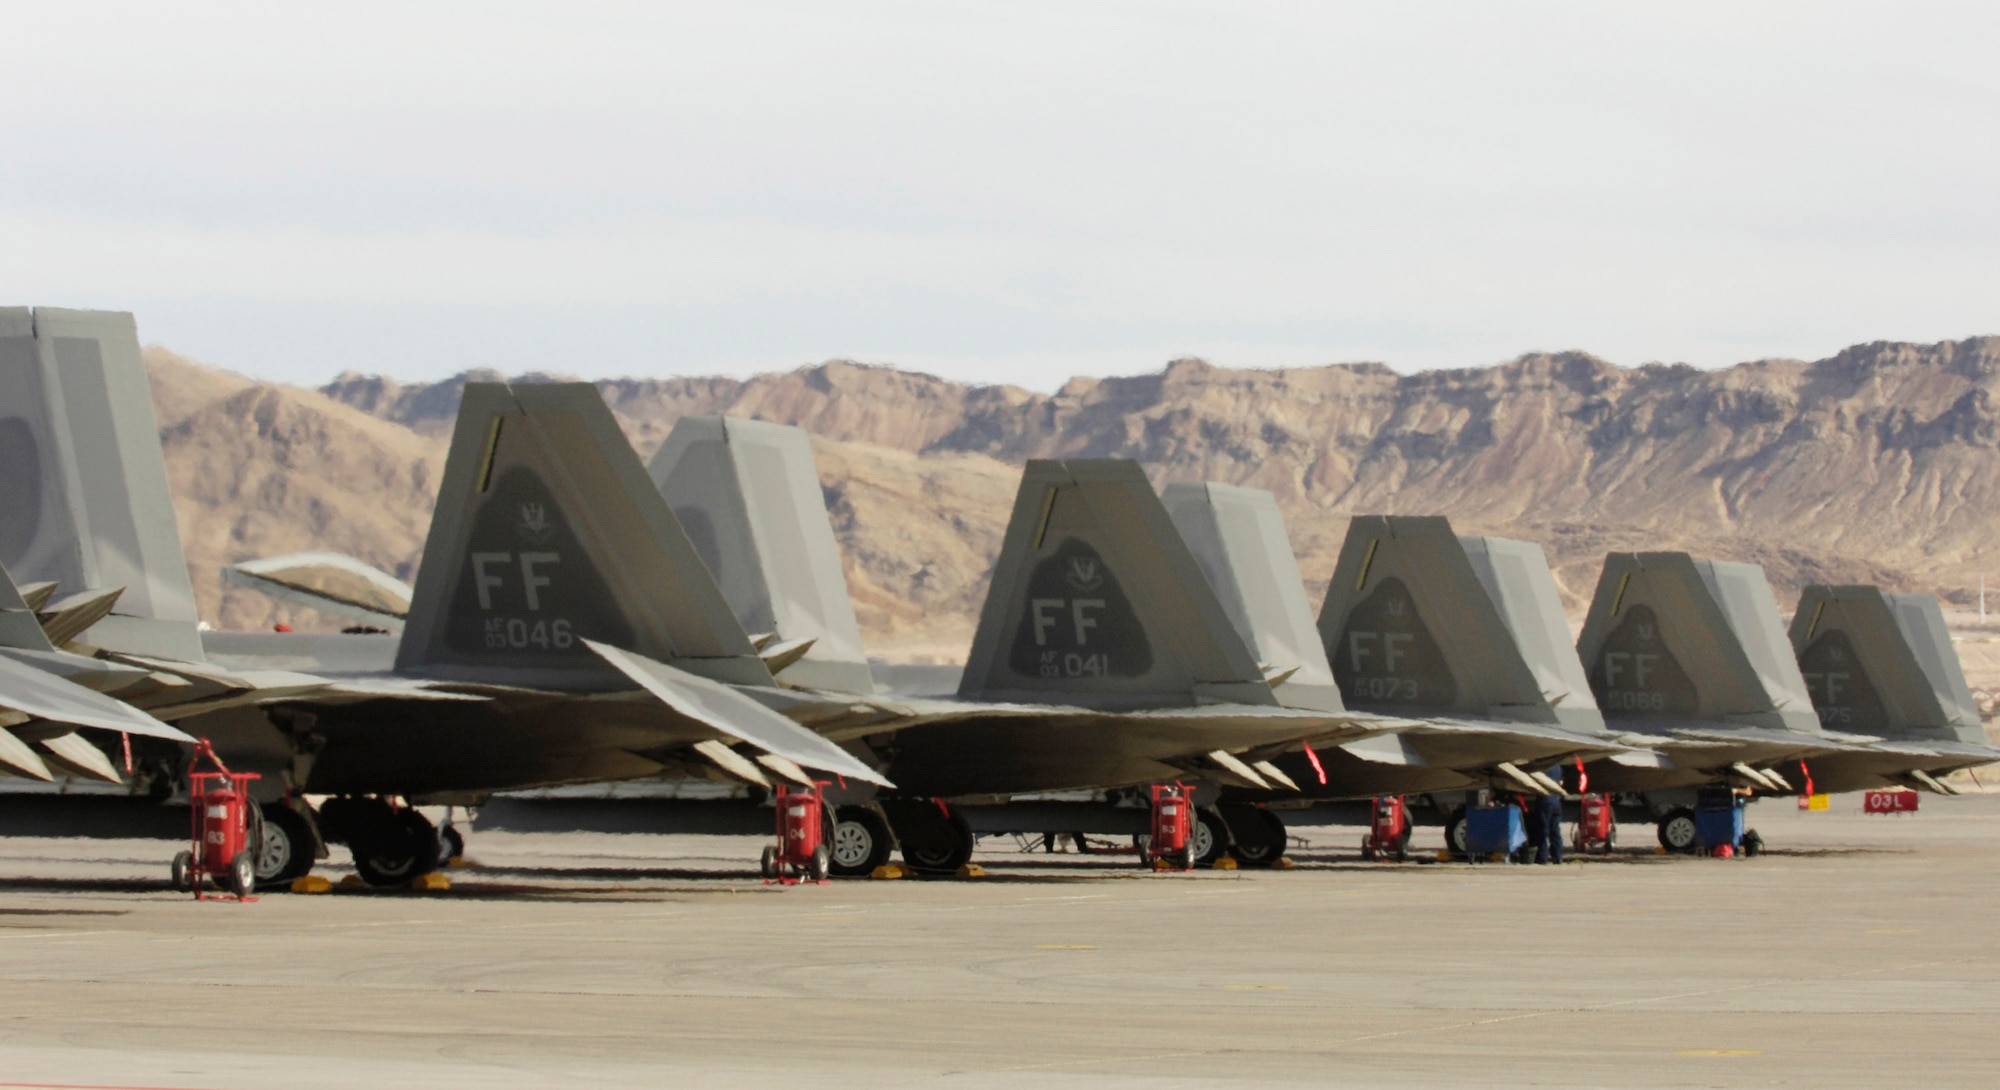 F-22 Raptors from 94th Fighter Squadron at Langley Air Force Base, Va., are parked on the flightline during Red Flag Feb. 6 at Nellis AFB, Nev. The exercise sharpens aircrews' warfighting skills in realistic combat situations. The aircraft are flying missions day and night at the nearby Nevada Test and Training Range where they simulate an air war. The Air Force and Navy, along with Australia and the United Kingdom militaries, are participating in the exercise. This is the first deployment to Red Flag for the 94th FS with F-22s. (U.S. Air Force photo/Master Sgt. Kevin J. Gruenwald) 